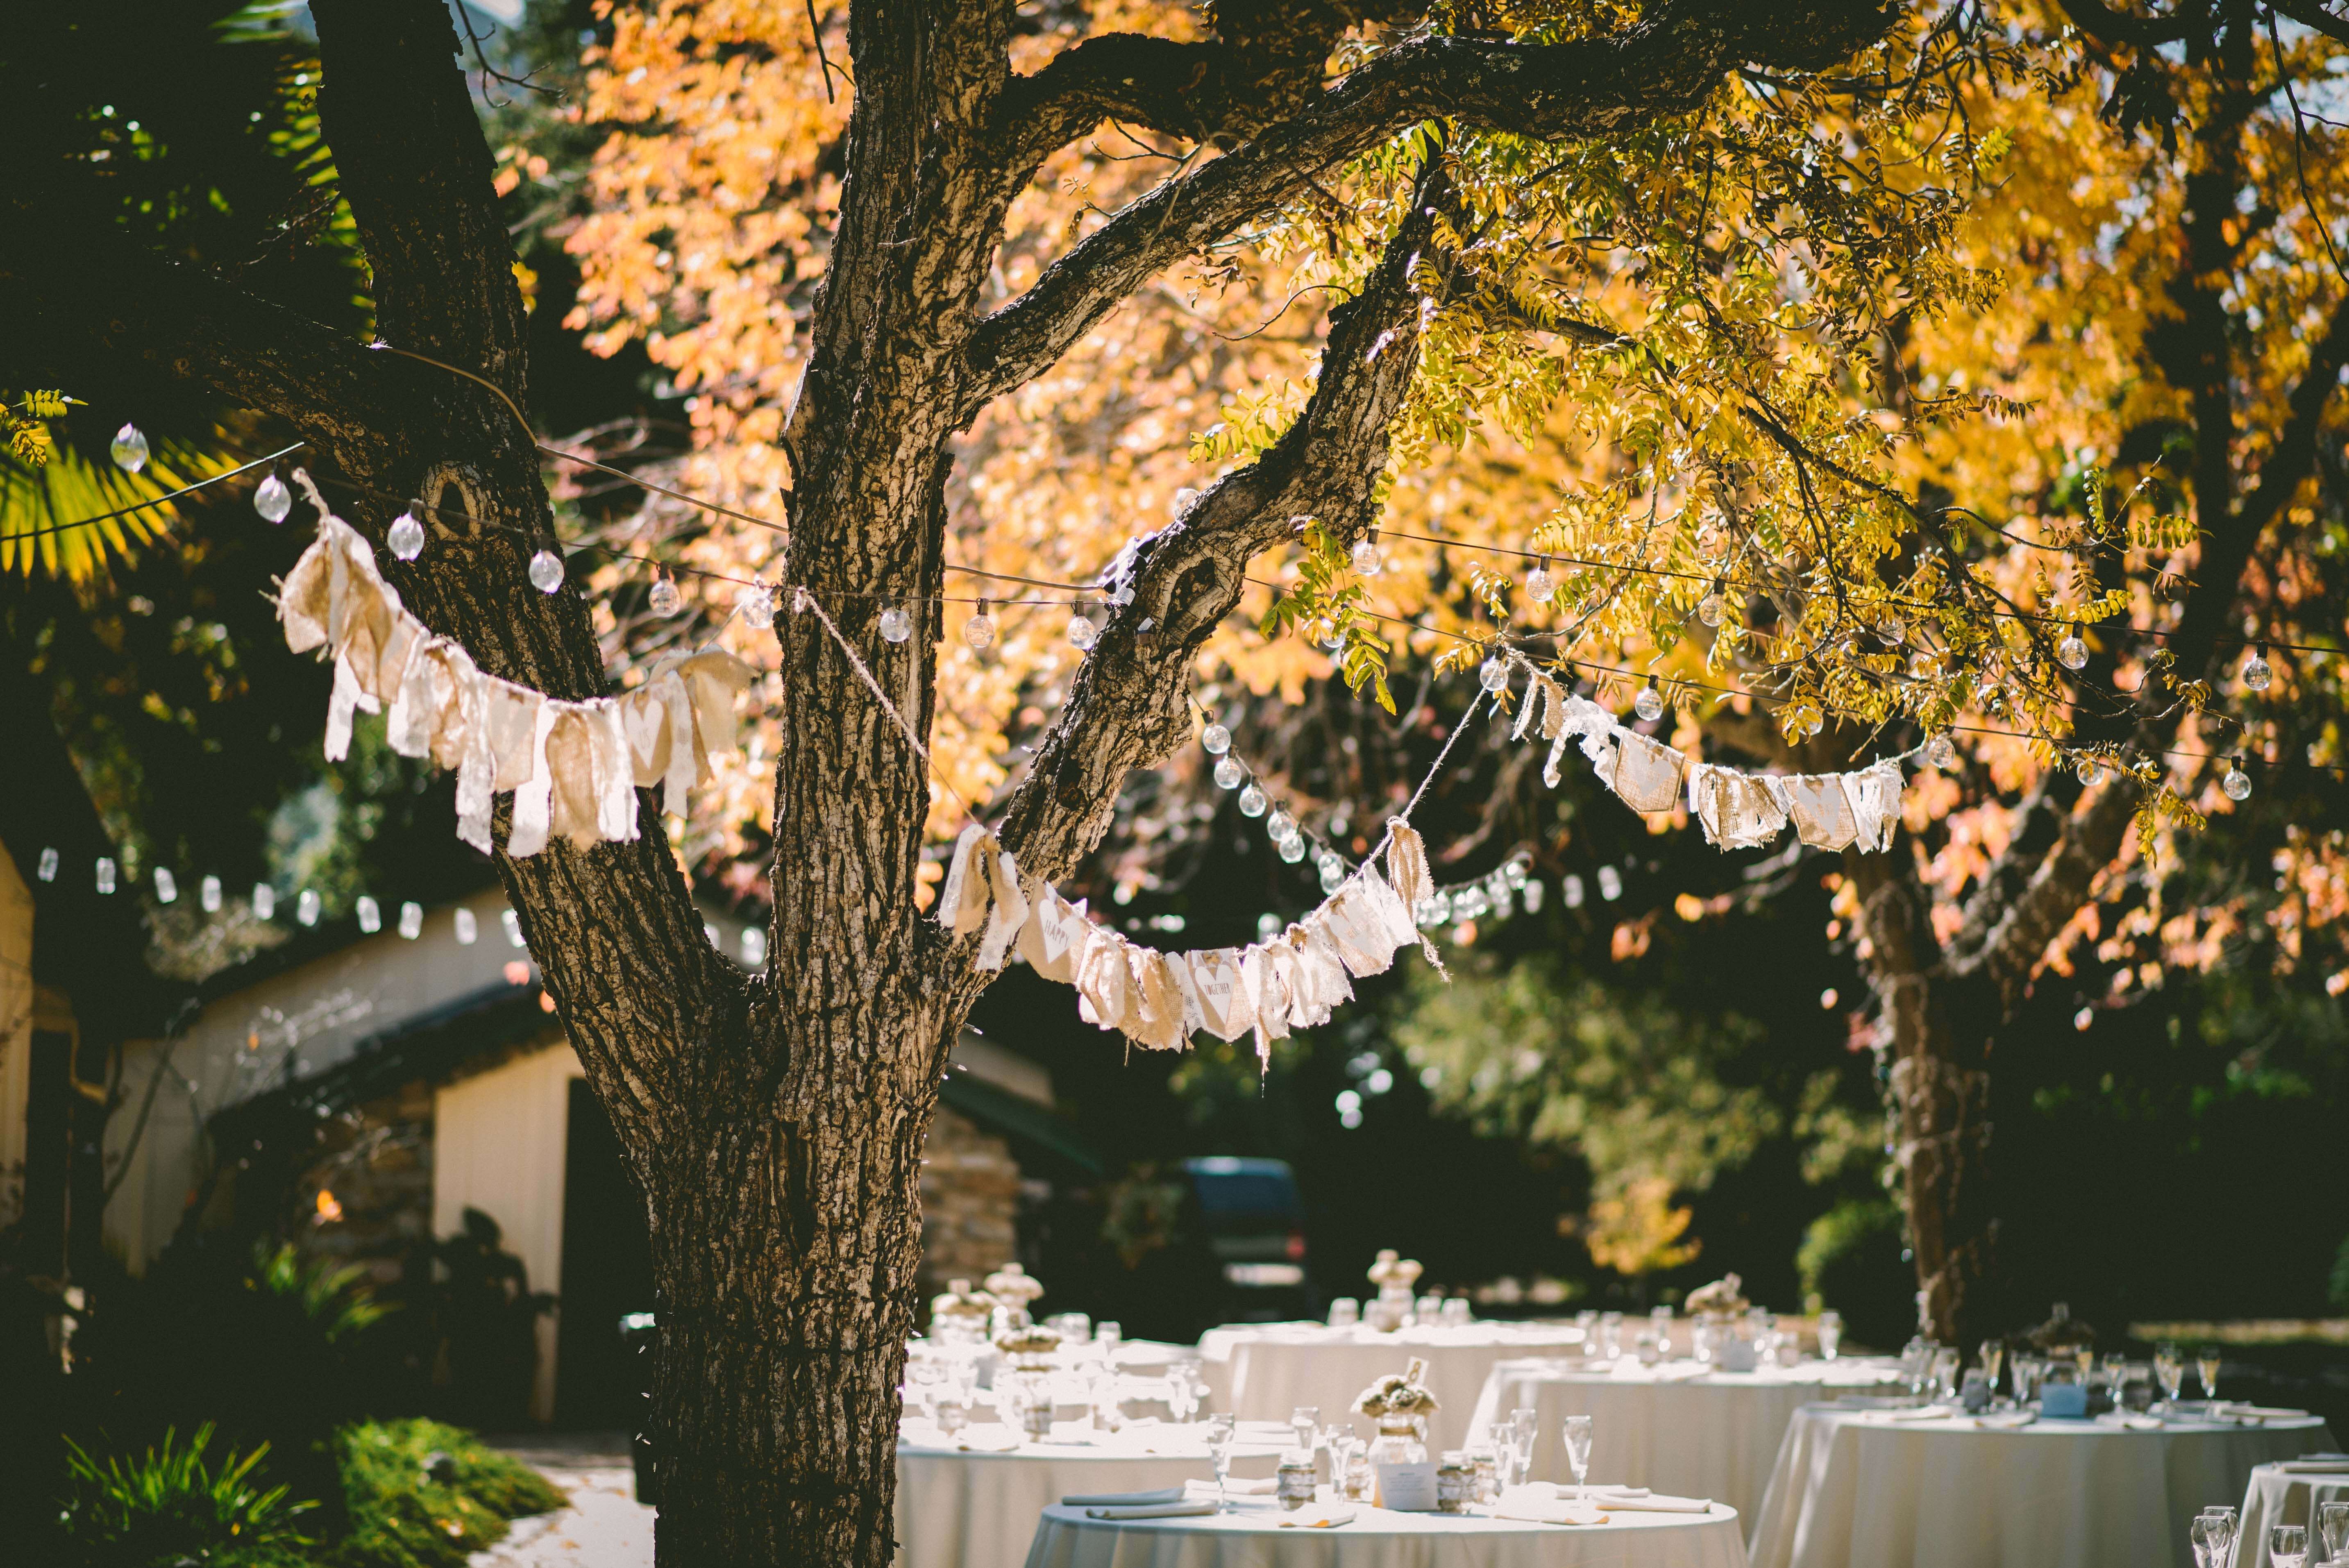 Guest Essentials to Make Your Fall Wedding the Coziest Event of the Season